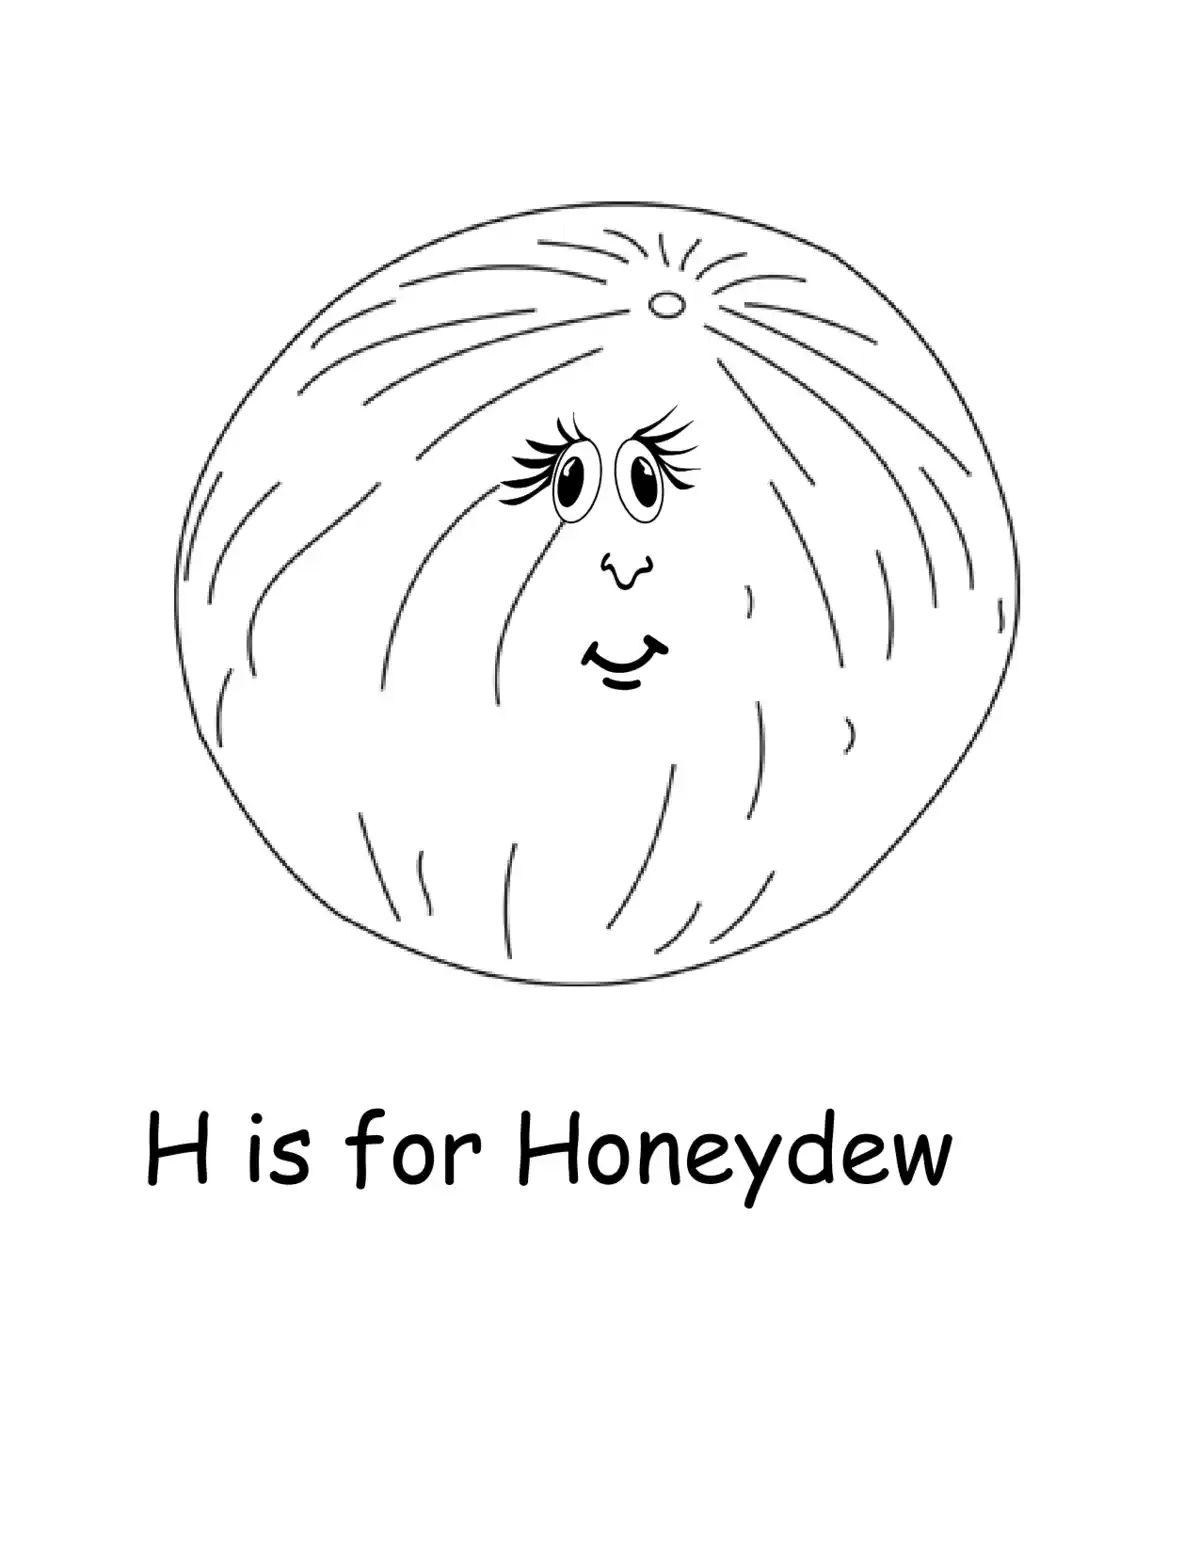 Honeydew Fruit Kids Coloring Pages Pdf